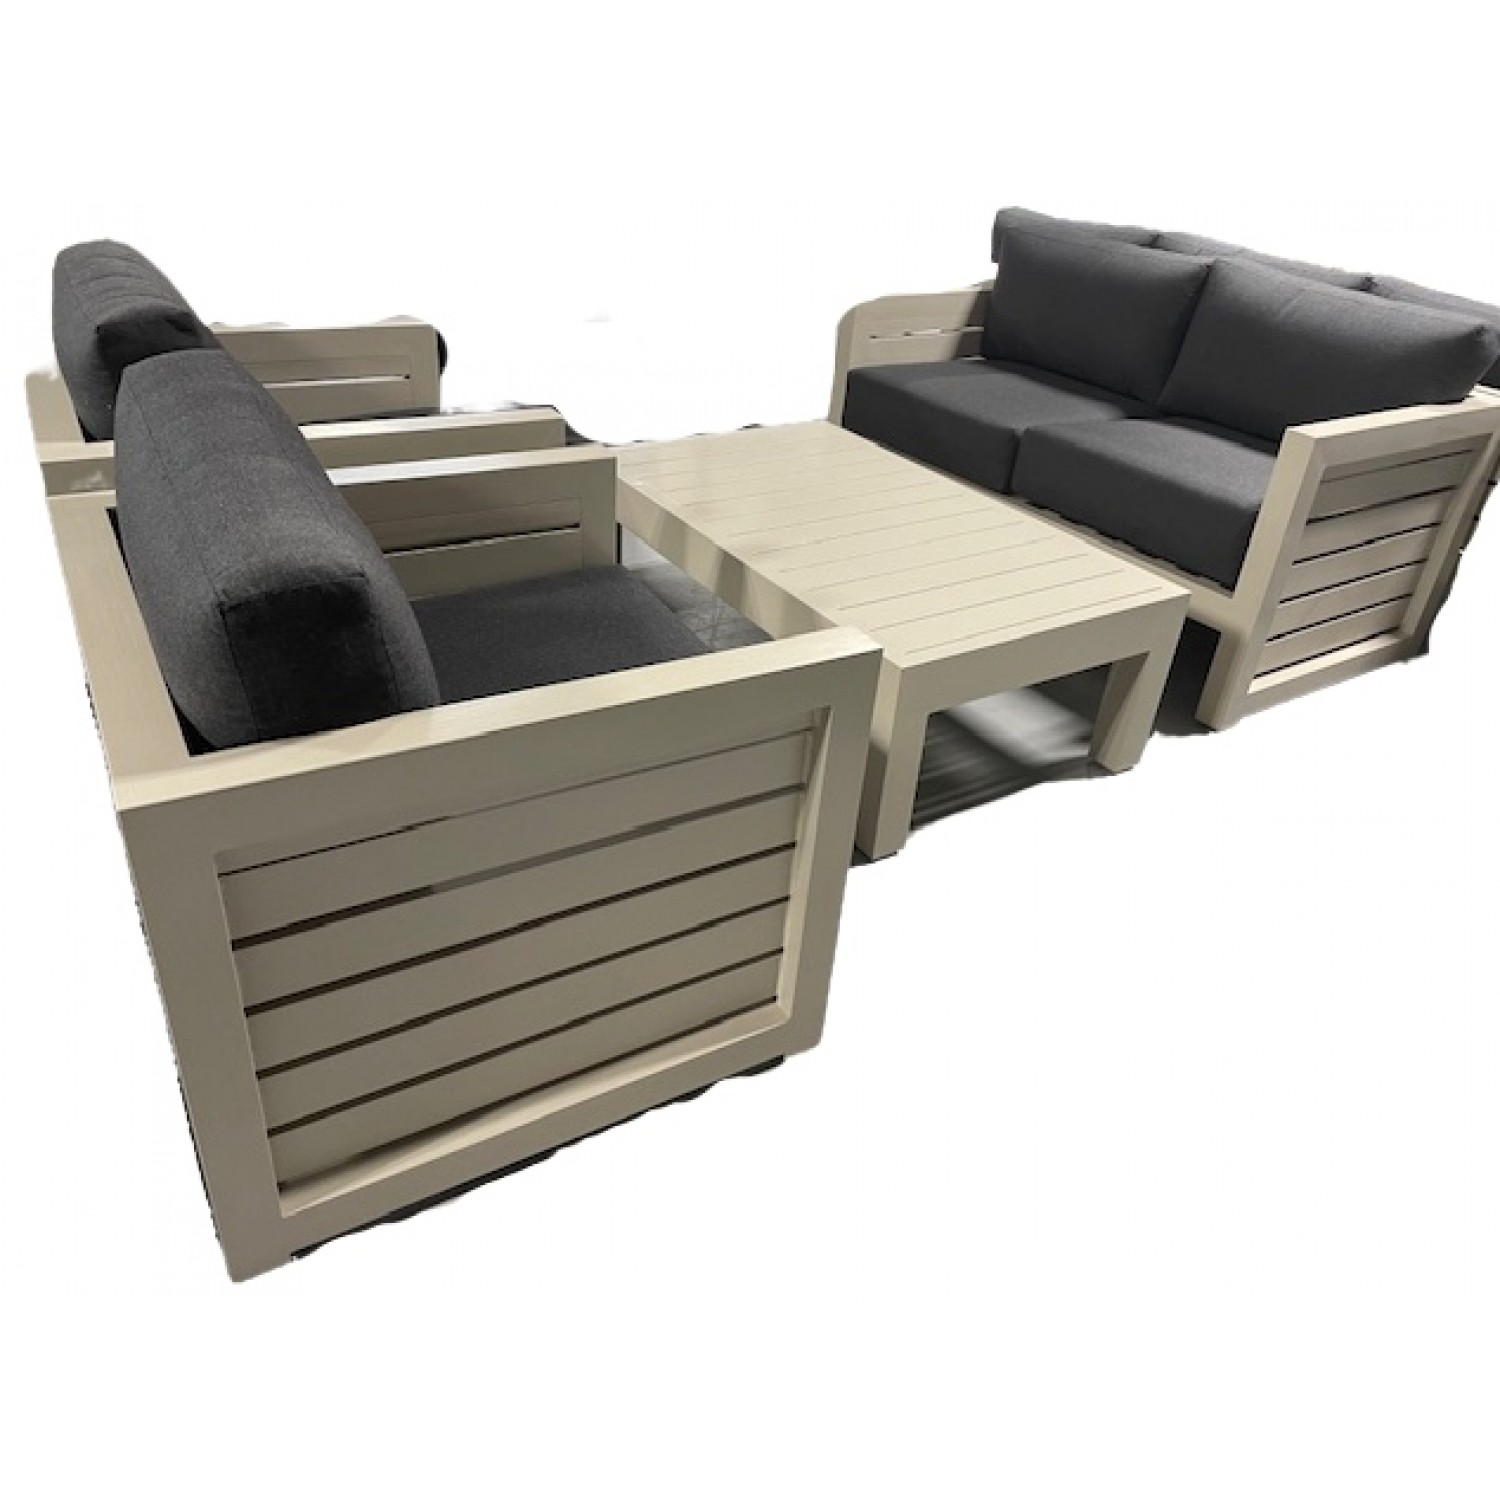 Lakeview Outdoor Love Seat Set